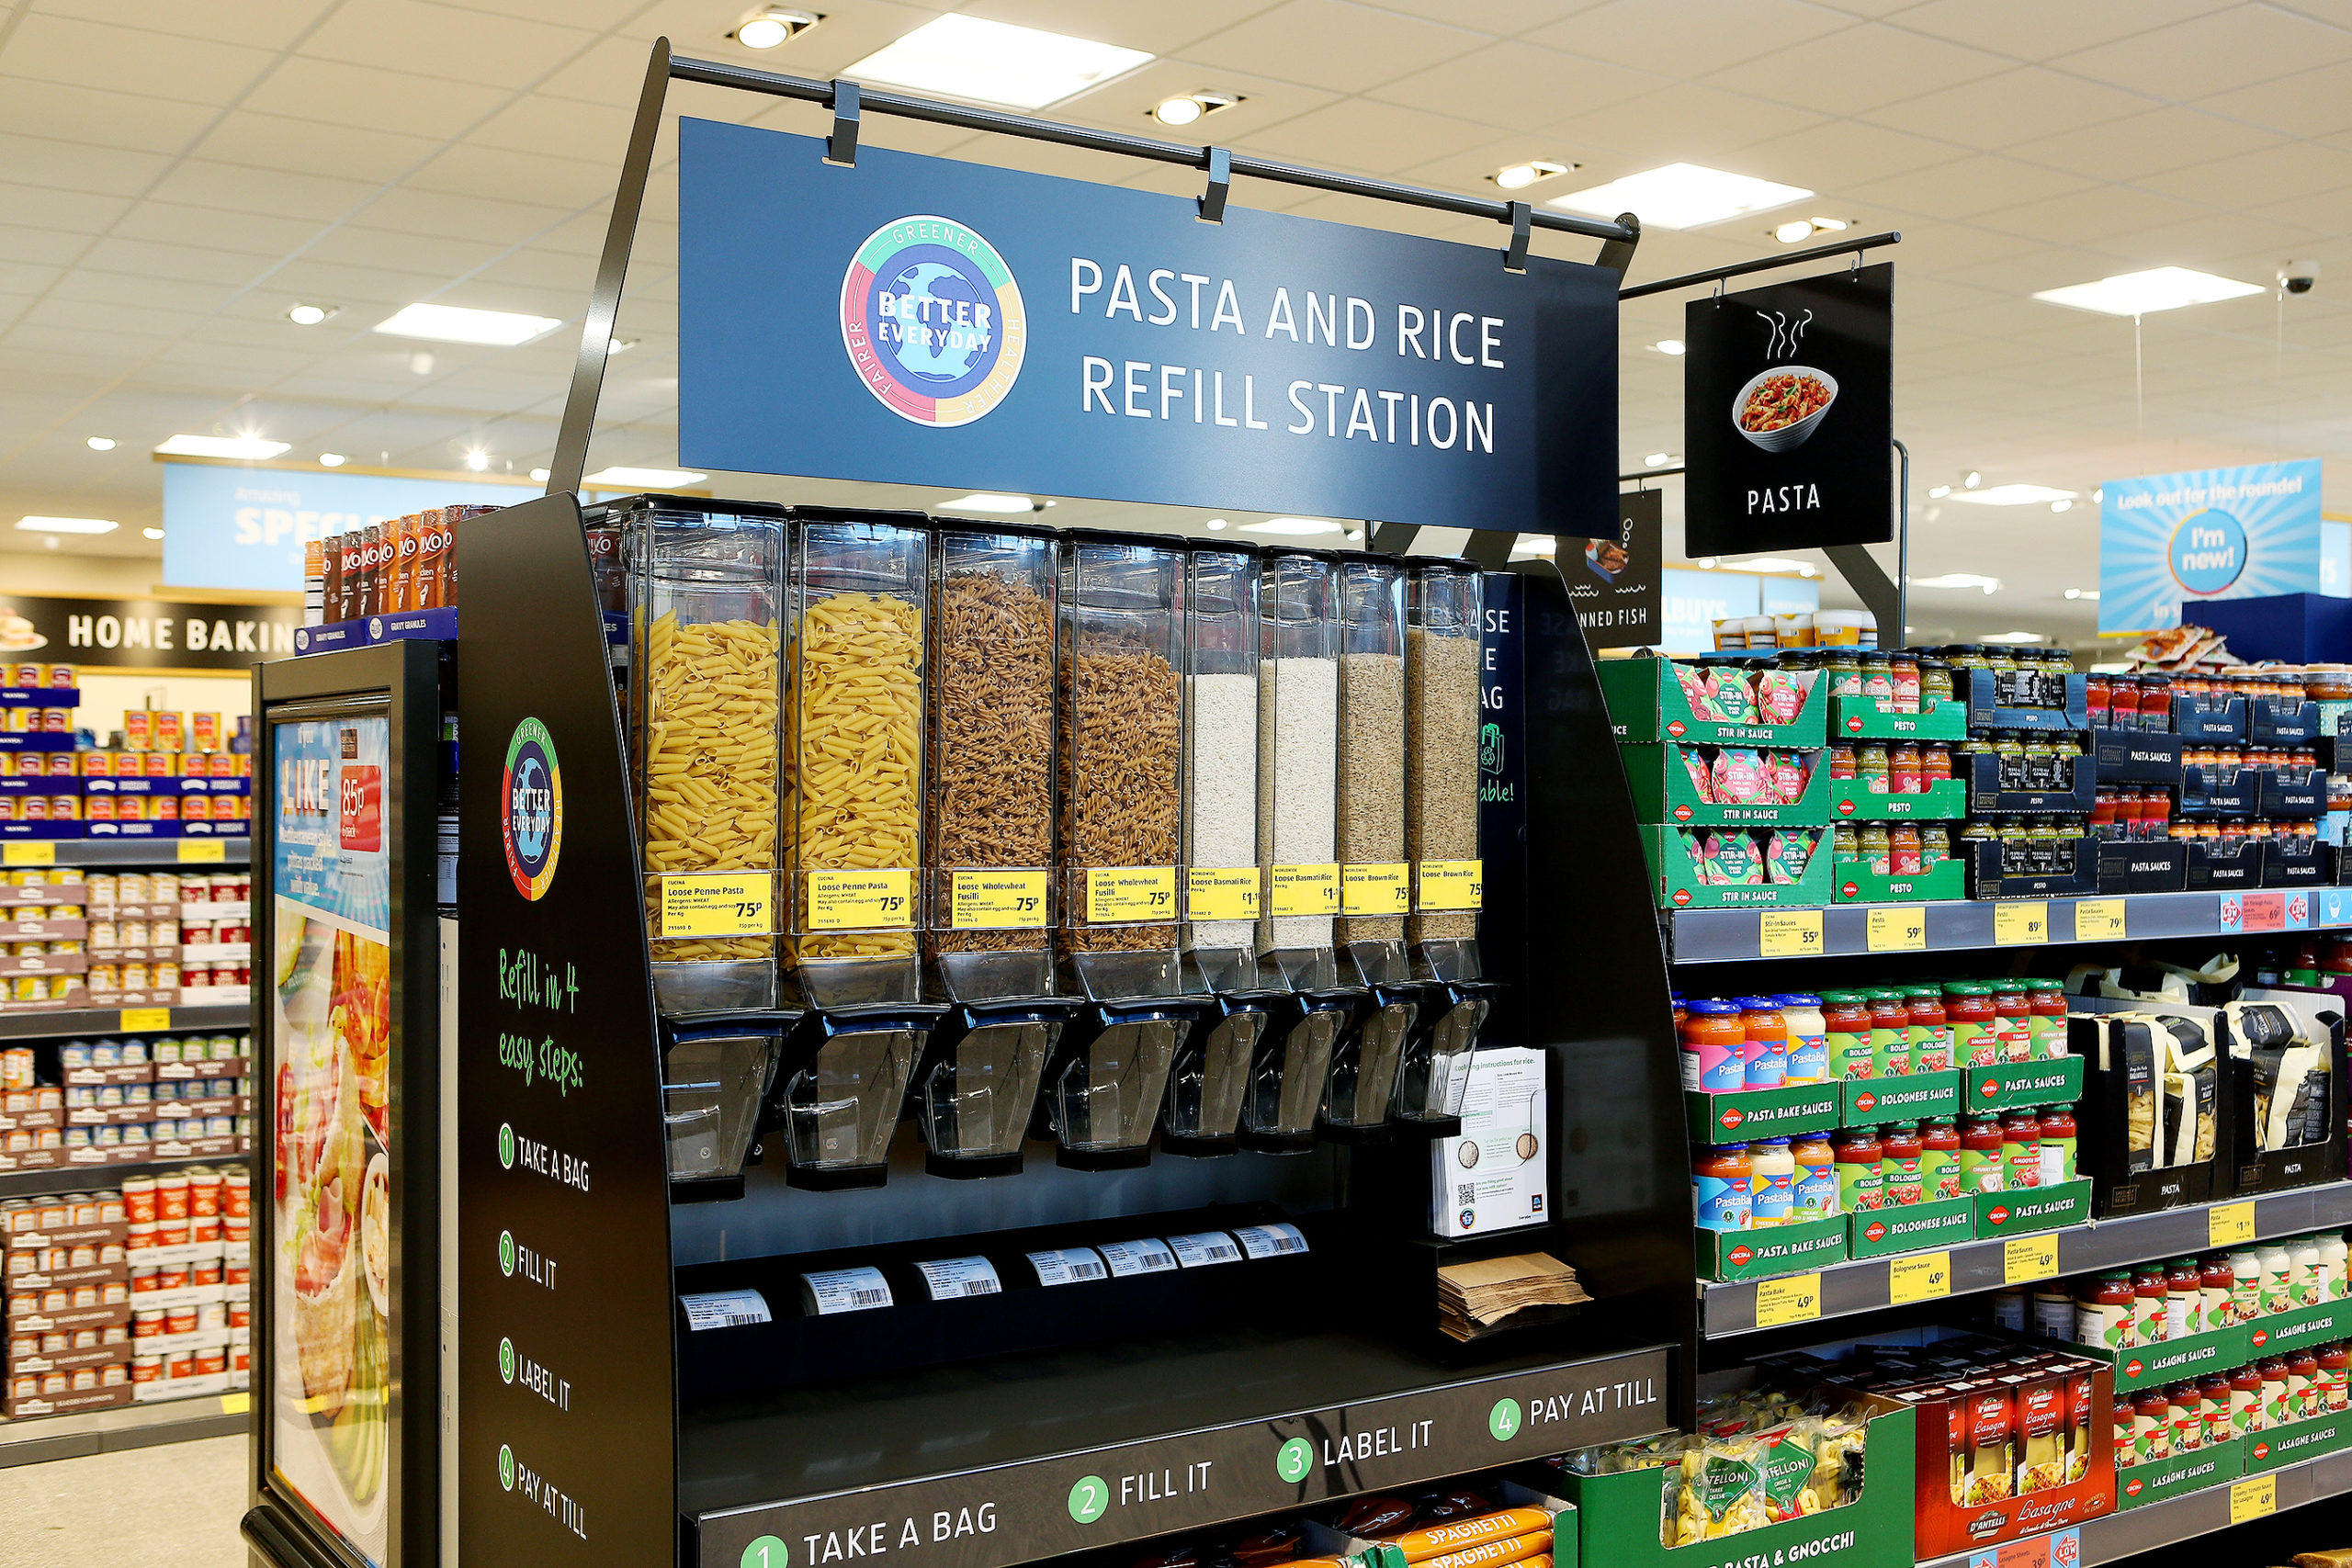 NEWS | Aldi to roll out loose rice and pasta to help customers shop more sustainably